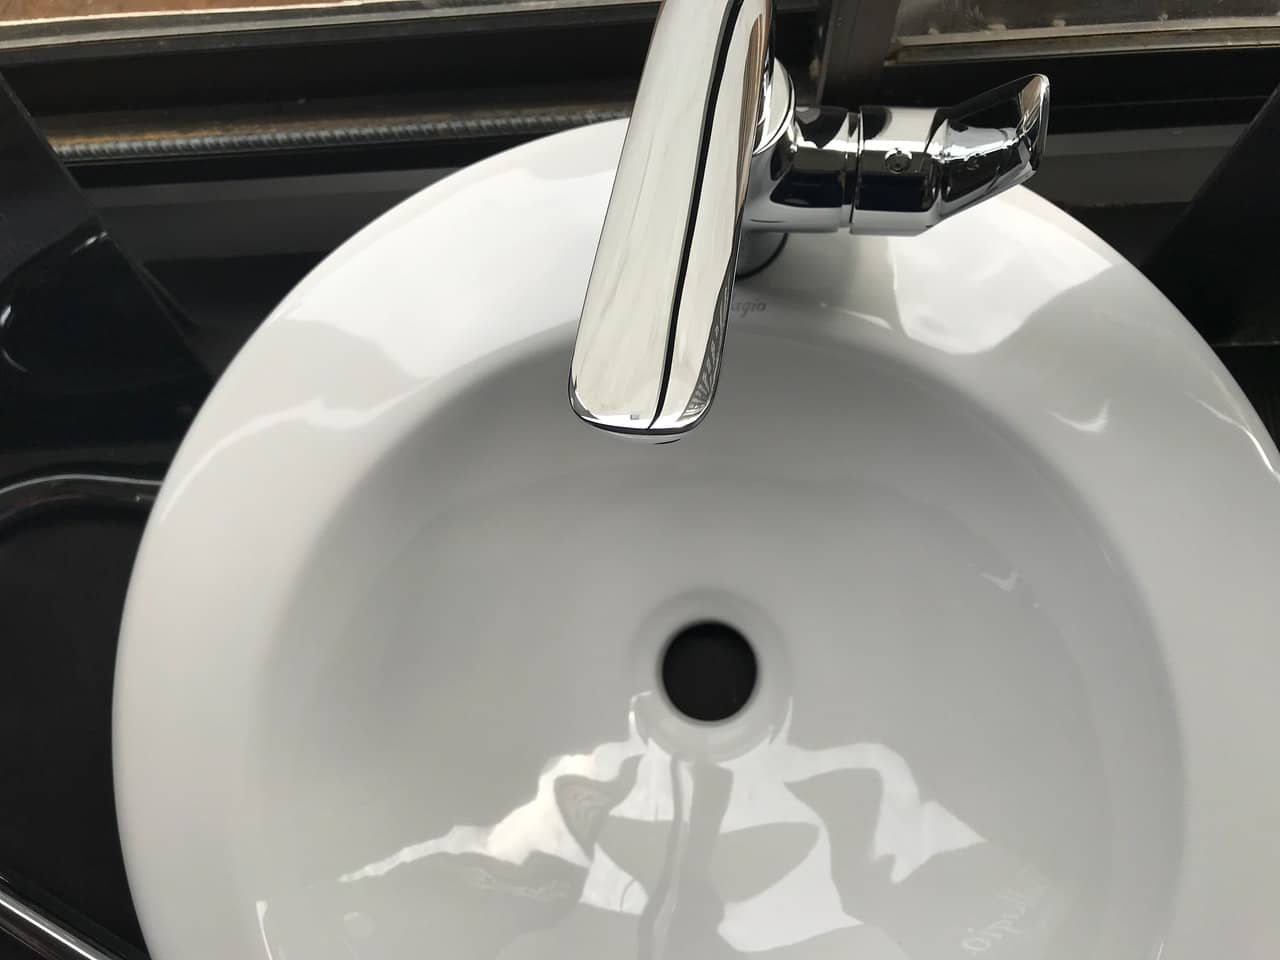 Utility Sink Faucets And Its Types